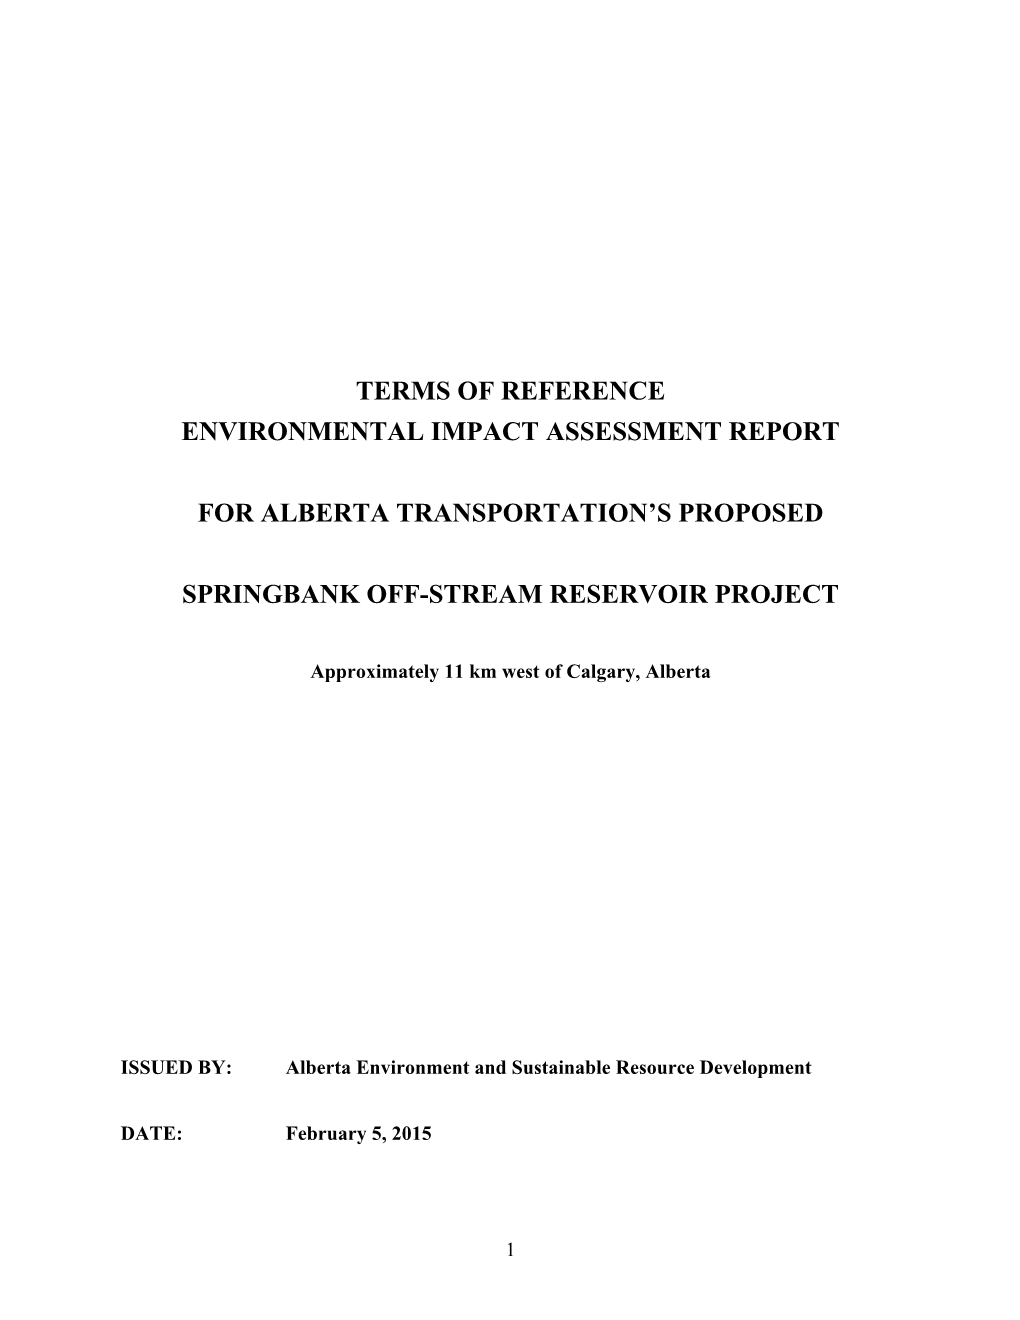 Terms of Reference Environmental Impact Assessment Report